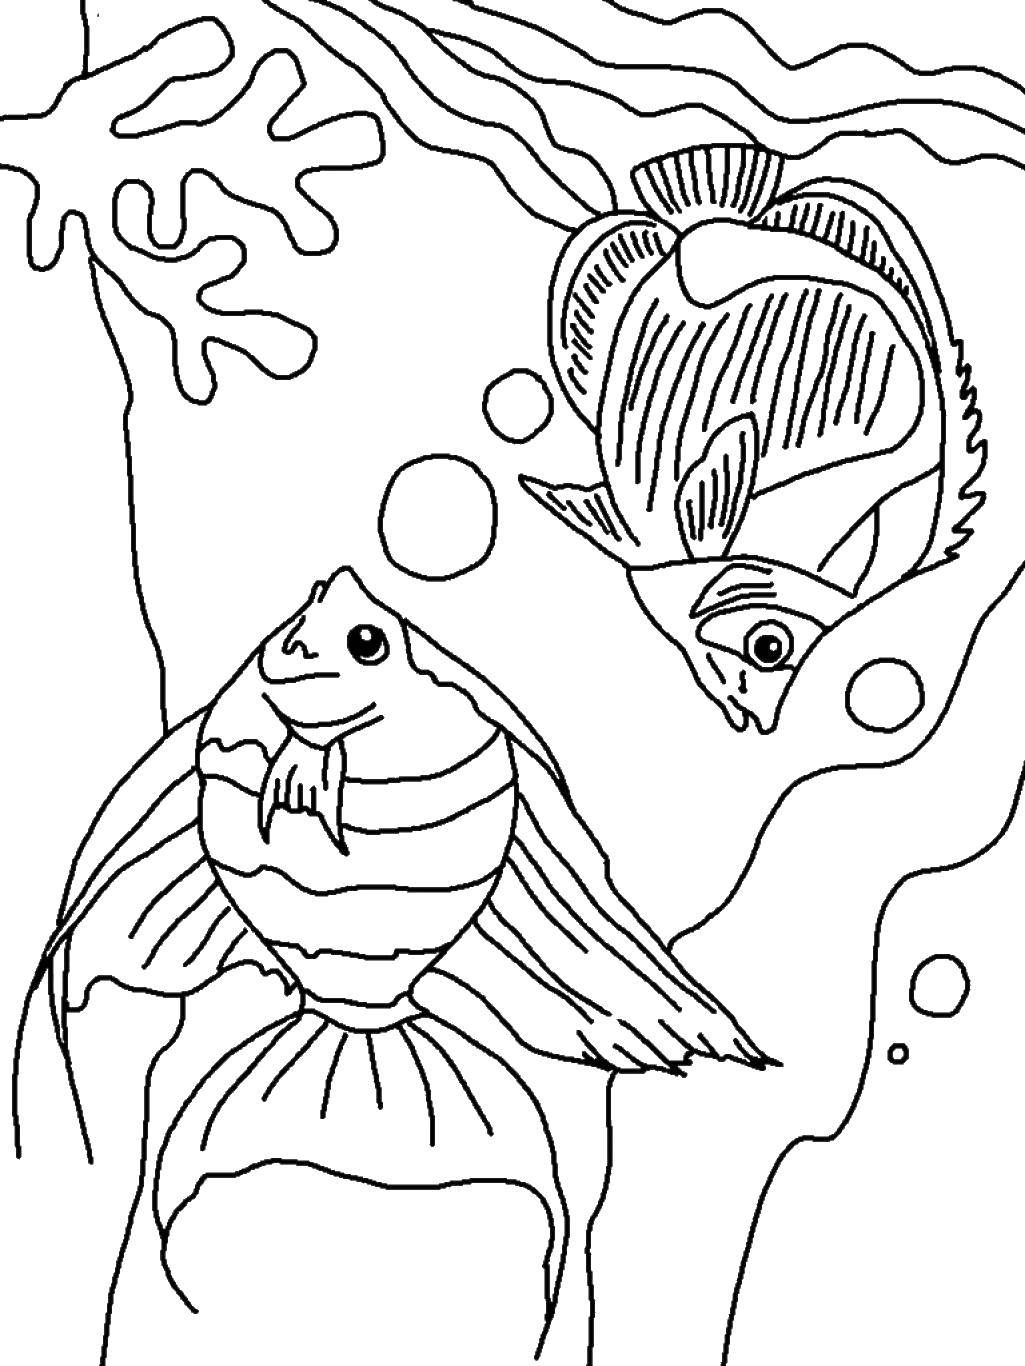 Coloring Two fish and corals with bubbles. Category Marine animals. Tags:  fish, coral, bubbles.